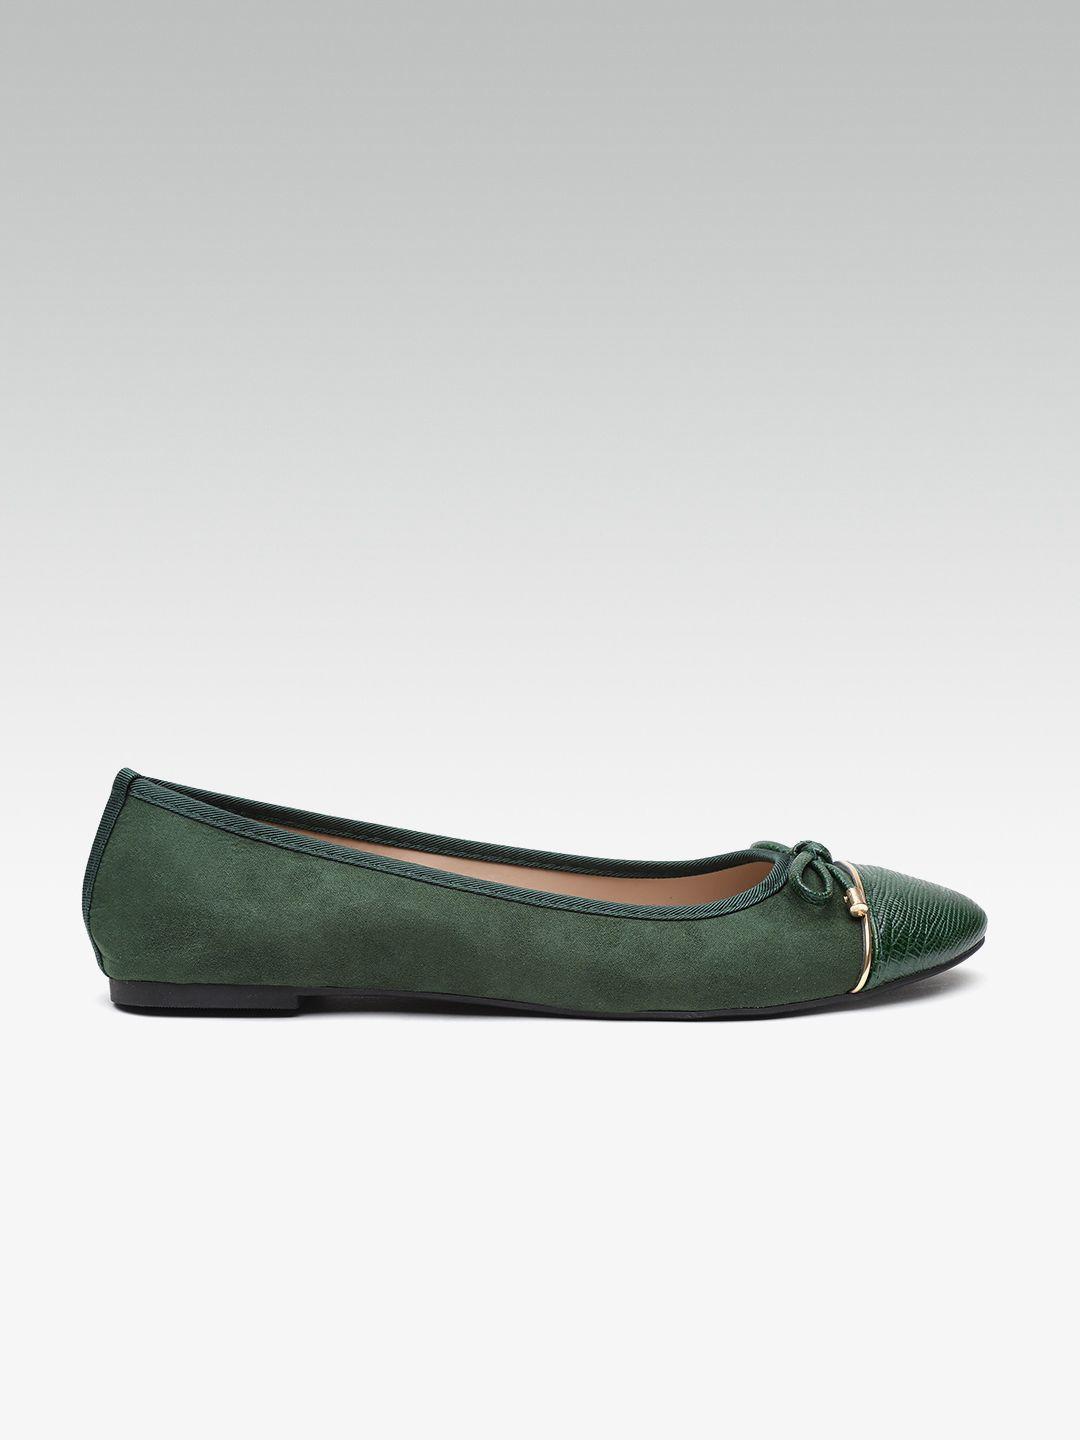 dorothy perkins women green solid ballerinas with bow detail